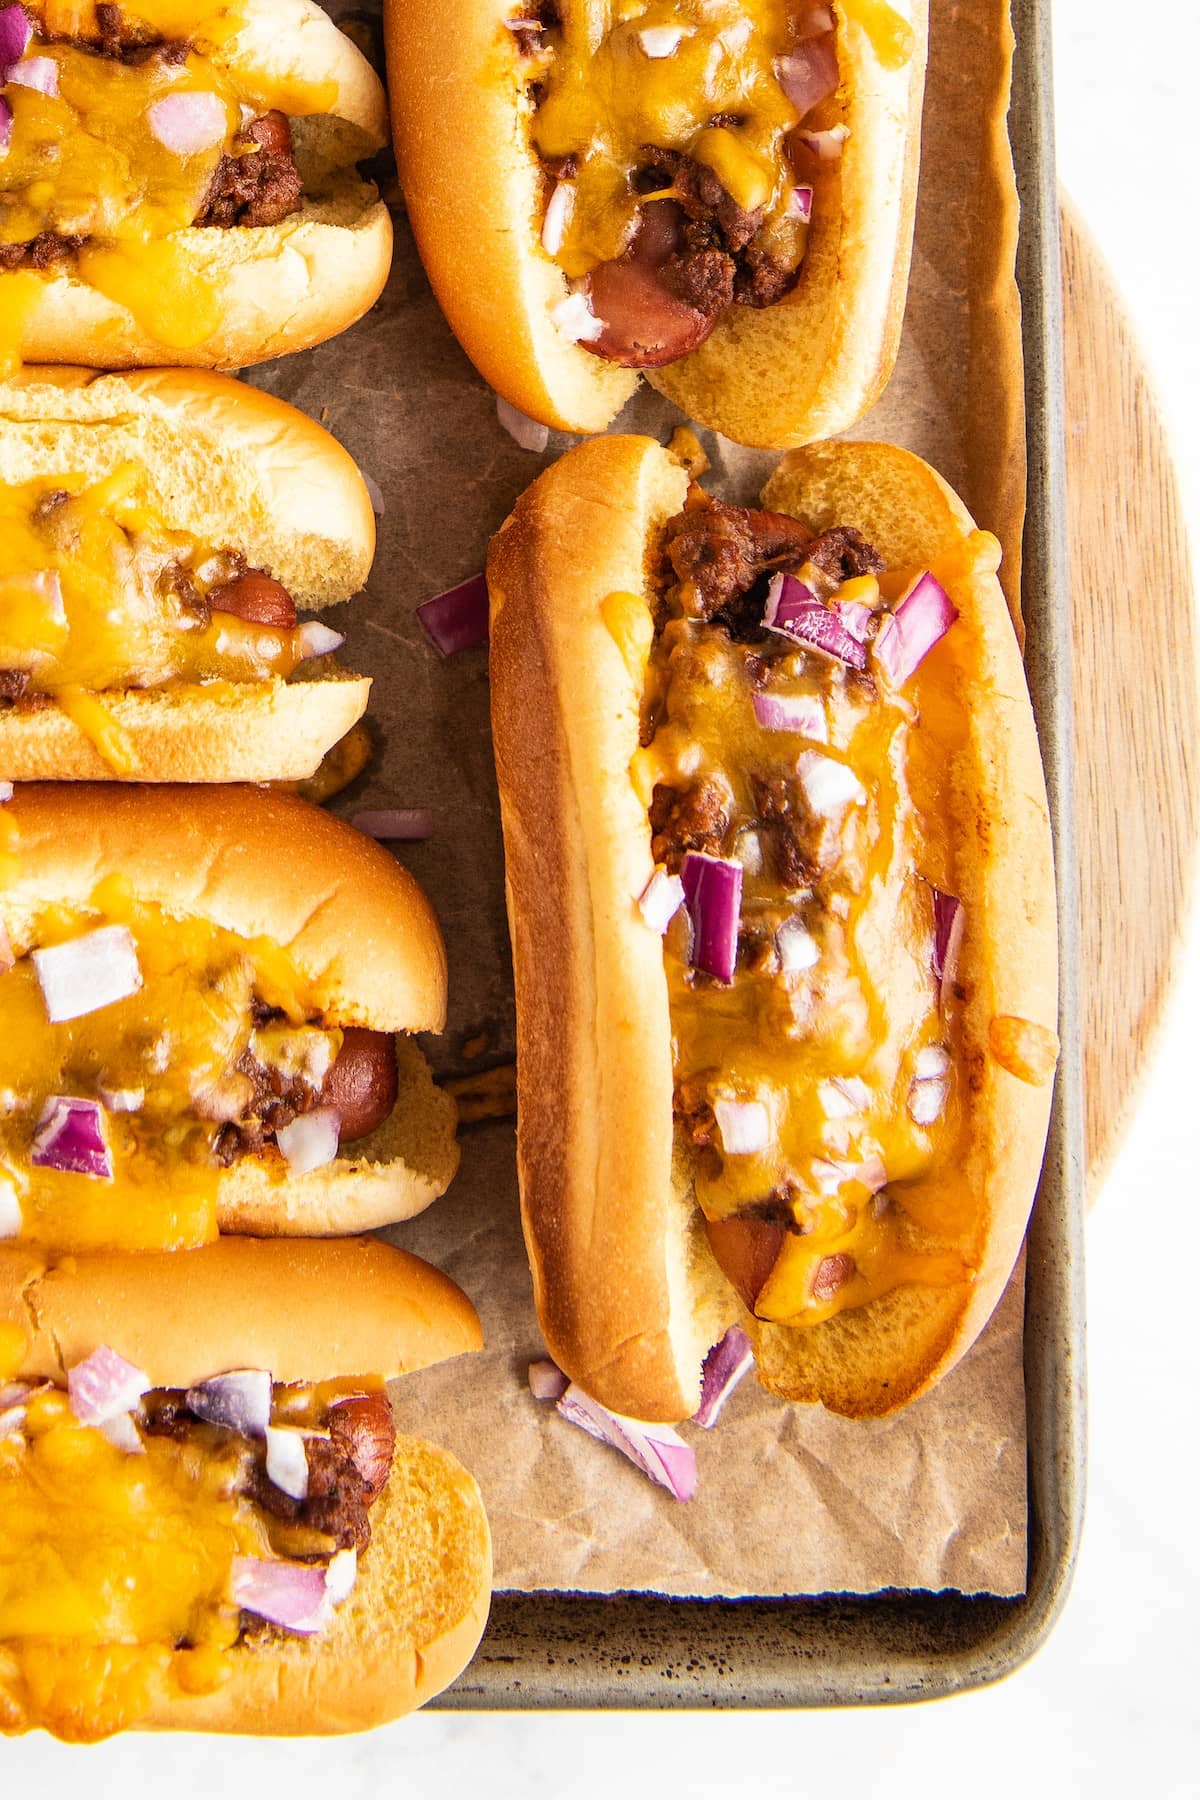 Chili hot dogs with melted cheddar cheese and chopped red onion.